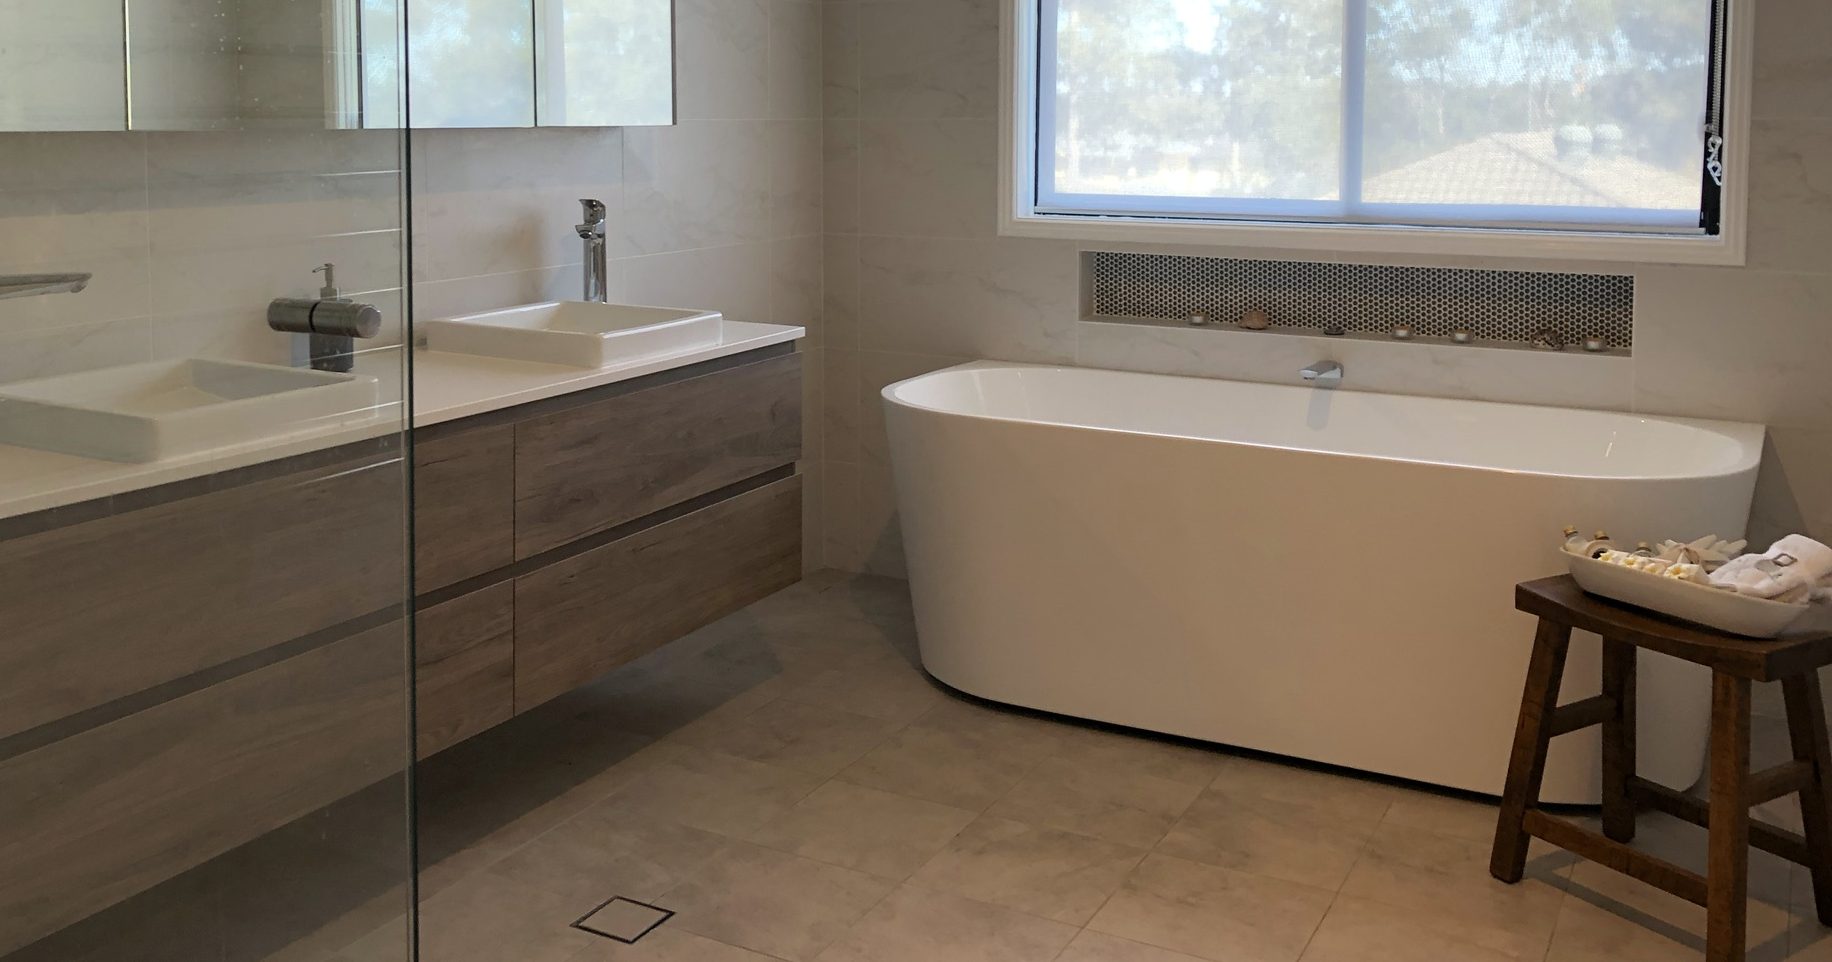 Gorgeous free standing bath with timber wall hung vanity and large mirrored shaving cabinet - Bathroom Renovation by Master Bathrooms & Kitchens